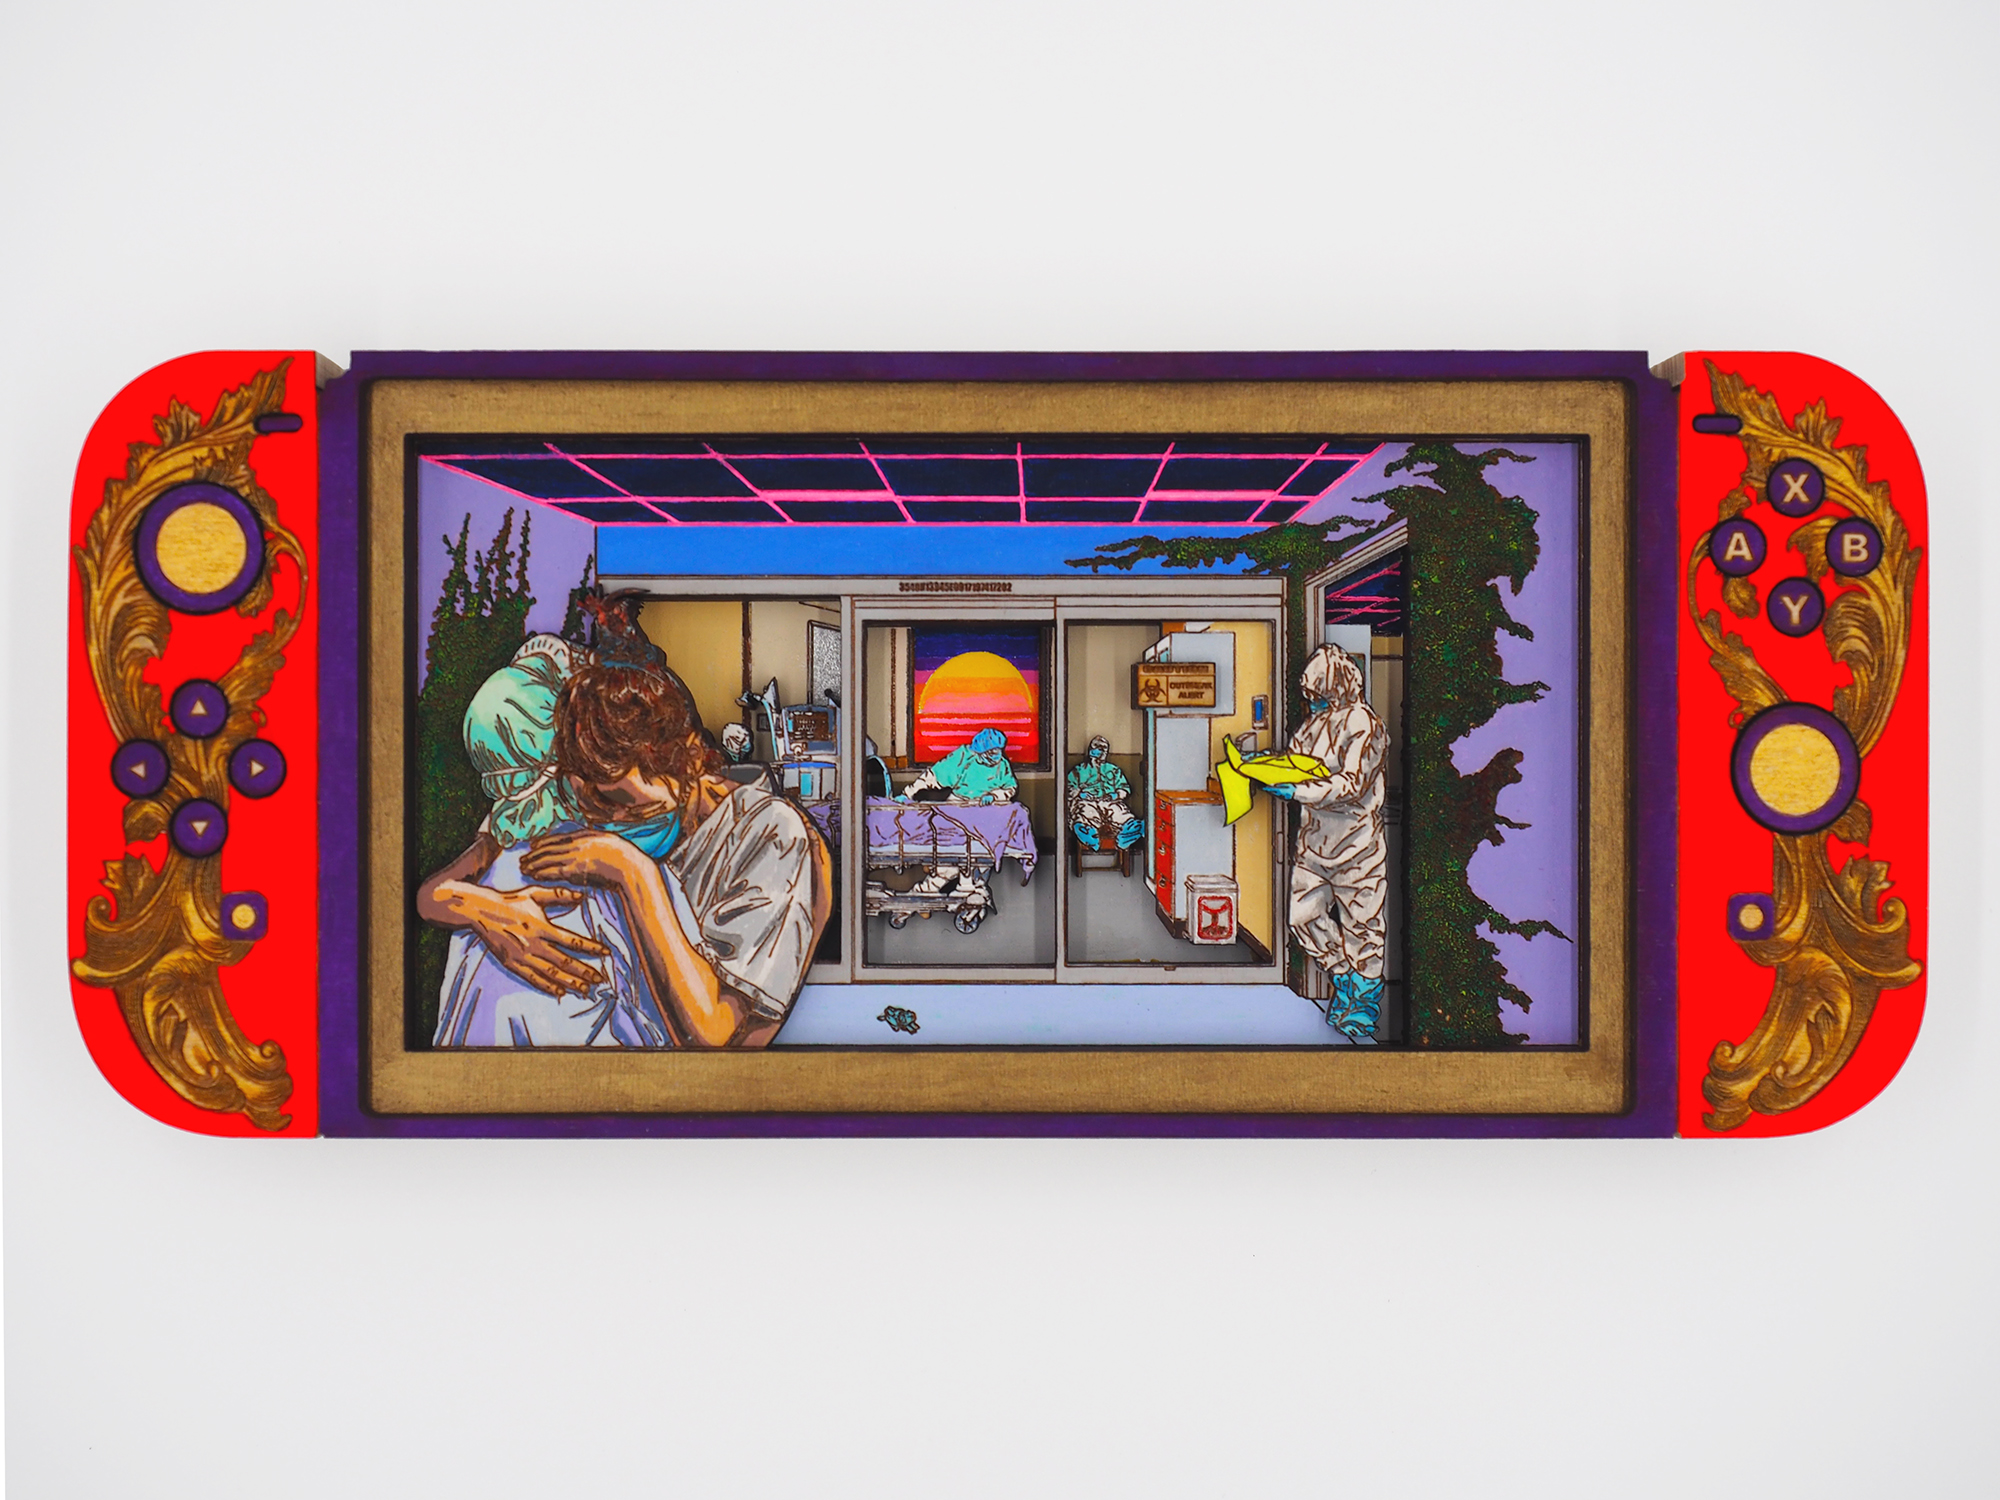 Memento Mori is a multi-layered wood piece carved out in relief format using laser technology. The initial digital drawing is engraved, and cut to shape to reveal a story in the works. The horizontal rectangular piece is adorned by decorations of a video game controller format, where the screen might be represents a hospital setting with nurses hugging each other in tears, with doctors tending to the ill fated covid patients in biohazard containment rooms. The walls of the hospital walls are covered in growing vine, representing the spread of the Covid virus. 